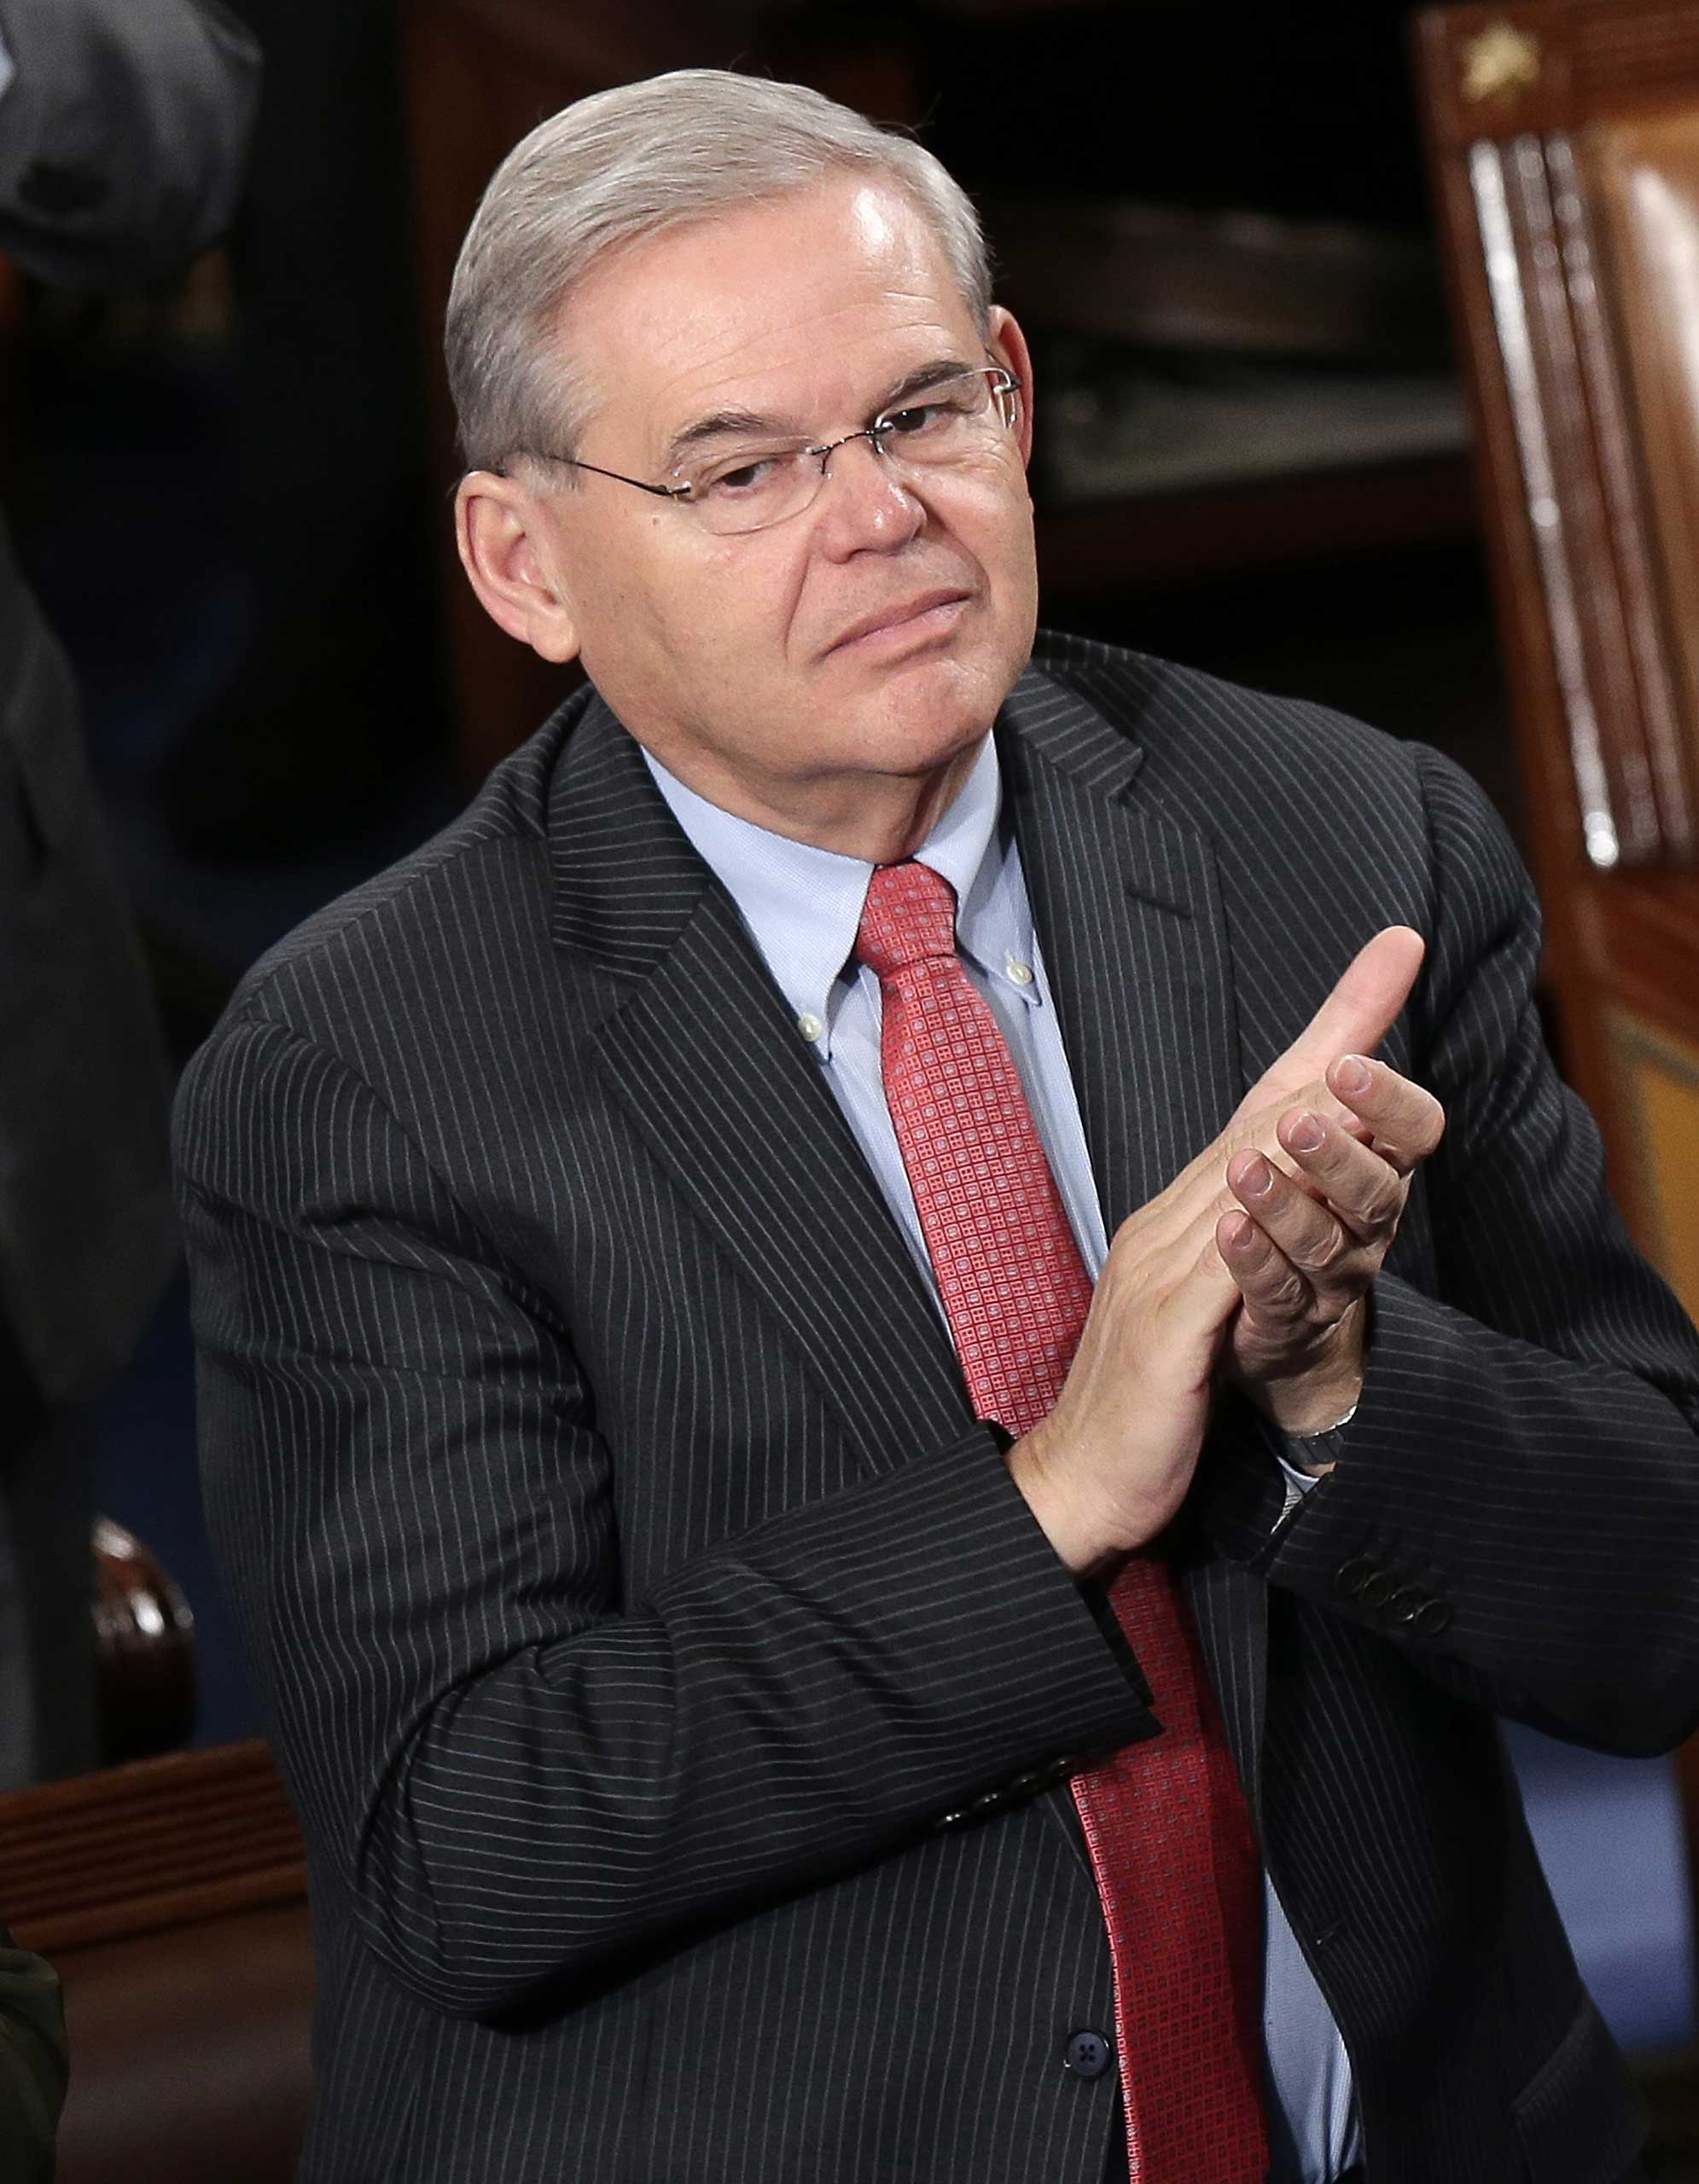 Robert Menendez
                              
                              Years in Senate: 2006-Present
                              Party: Democrat
                              State: New Jersey
                              
                              After more than a two-year investigation, a federal grand jury indicted Menendez on charges including conspiracy to commit bribery and wire fraud over his advocacy of business interests of Dr. Salomon Melgen.
                              
                              — Alex Rogers